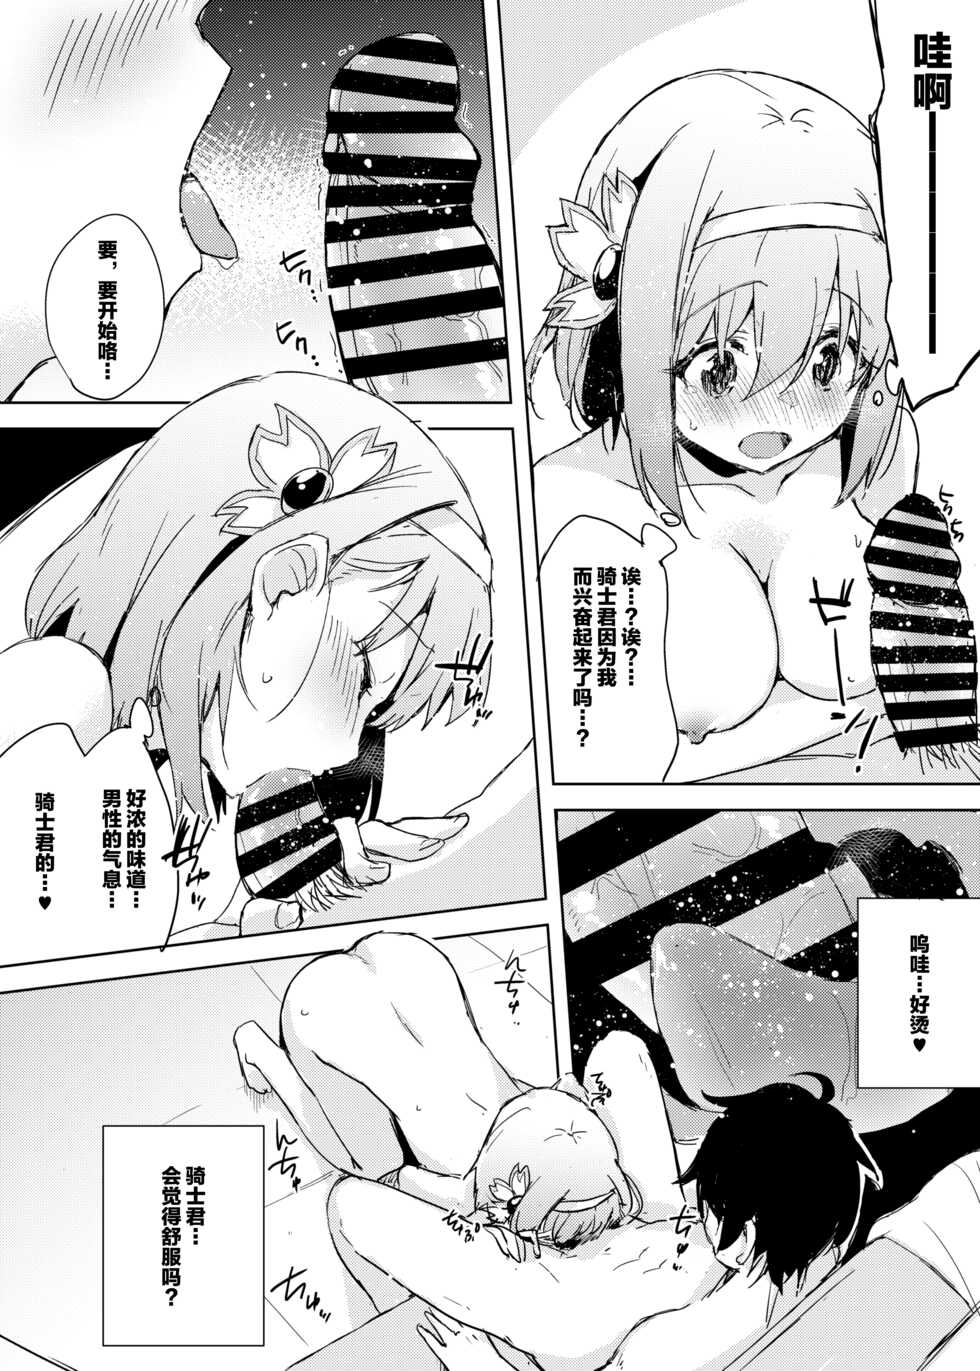 [DROP DEAD!! (Minase Syu)] Guildhouse e Re:Youkoso! - Welcome to Guildhouse! (Princess Connect! Re:Dive) [Chinese] [黎欧x苍蓝星汉化组] [Digital] - Page 9